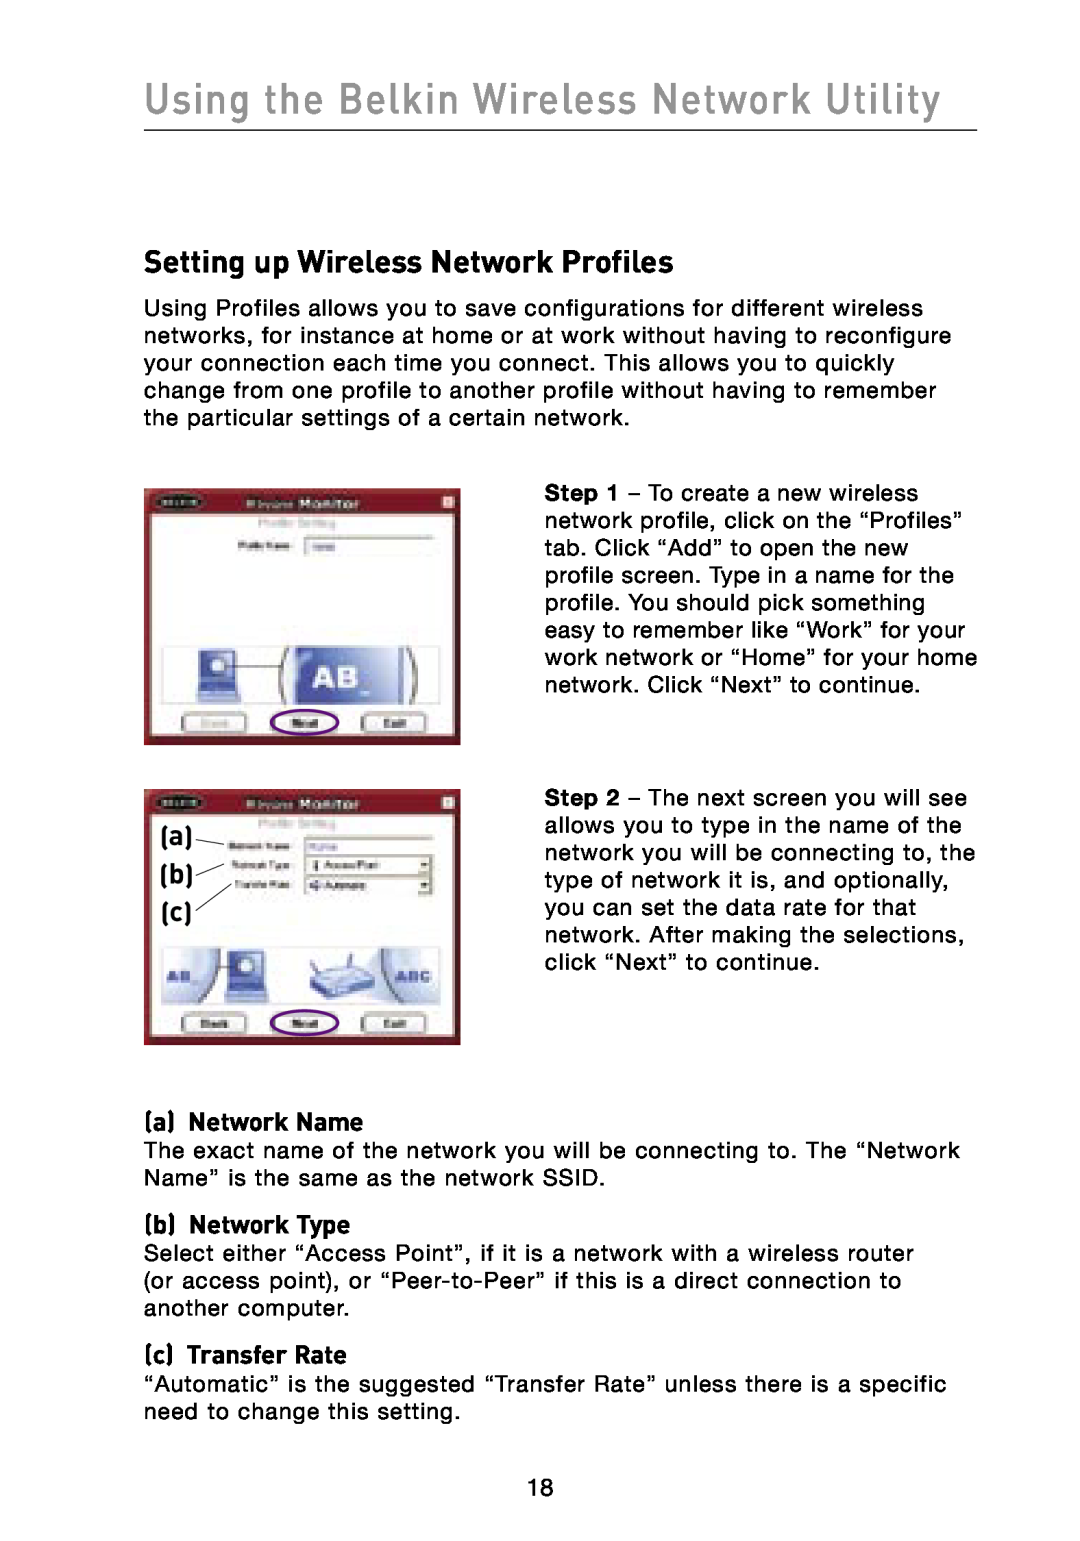 Belkin F6D3000 user manual Setting up Wireless Network Profiles, a b c, b Network Type, c Transfer Rate, a Network Name 